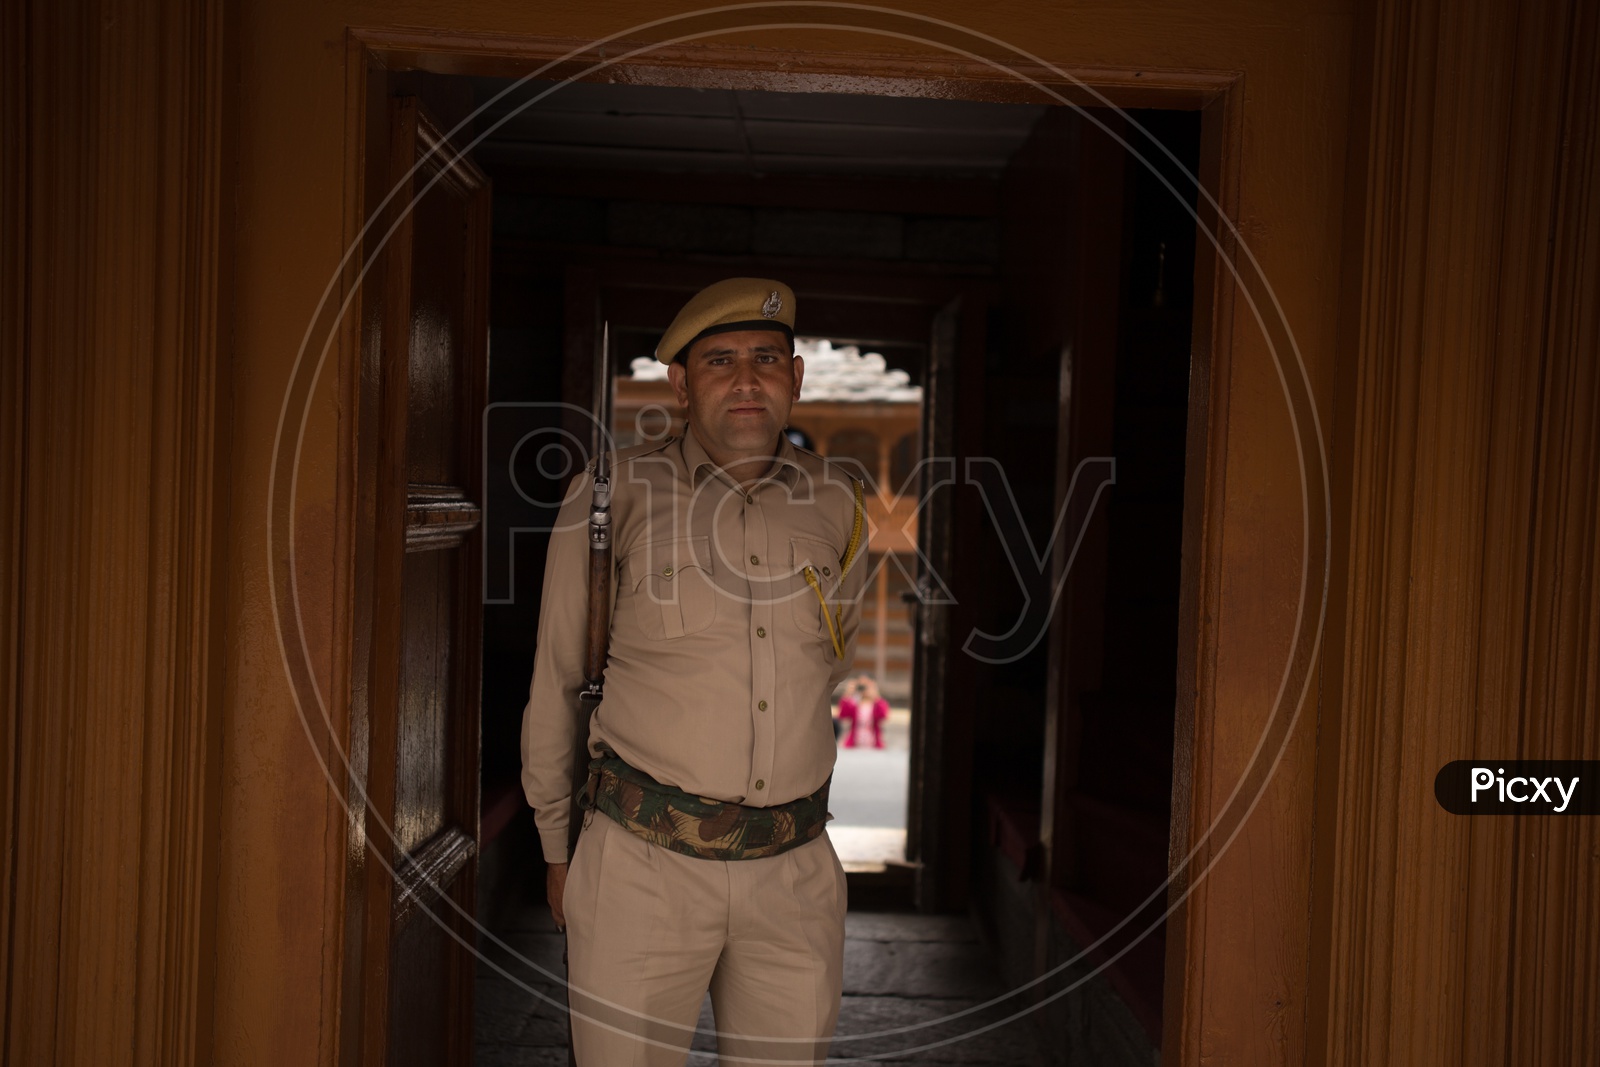 A Security Guard With a Gun In Duty At Goddess Mathi temple  In Spiti Valley